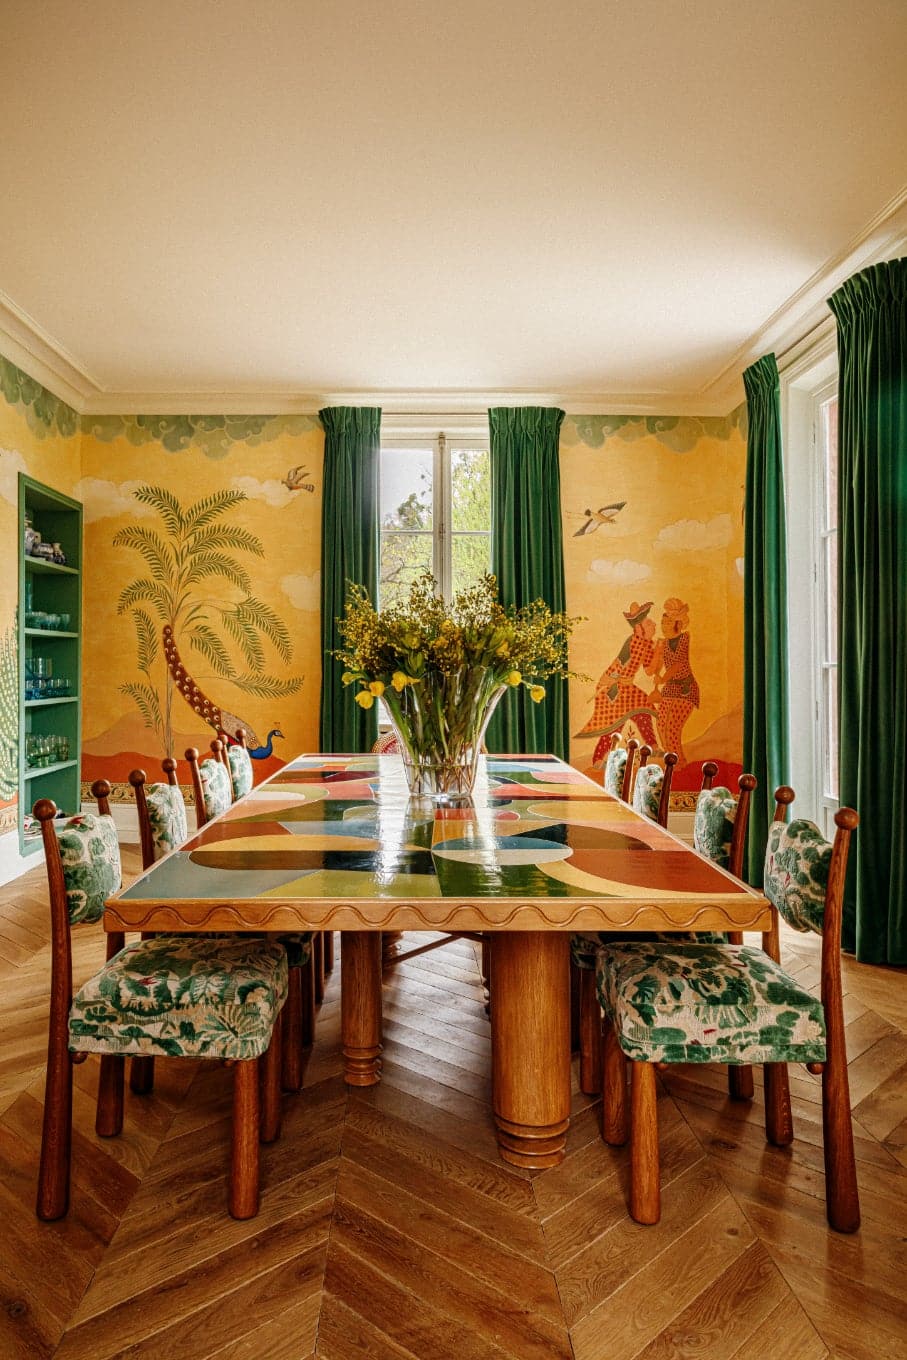 Dining room by Paris interior designer Laura Gonzalez featuring her printed Mawu chair upholstered in a verdant botanical print.